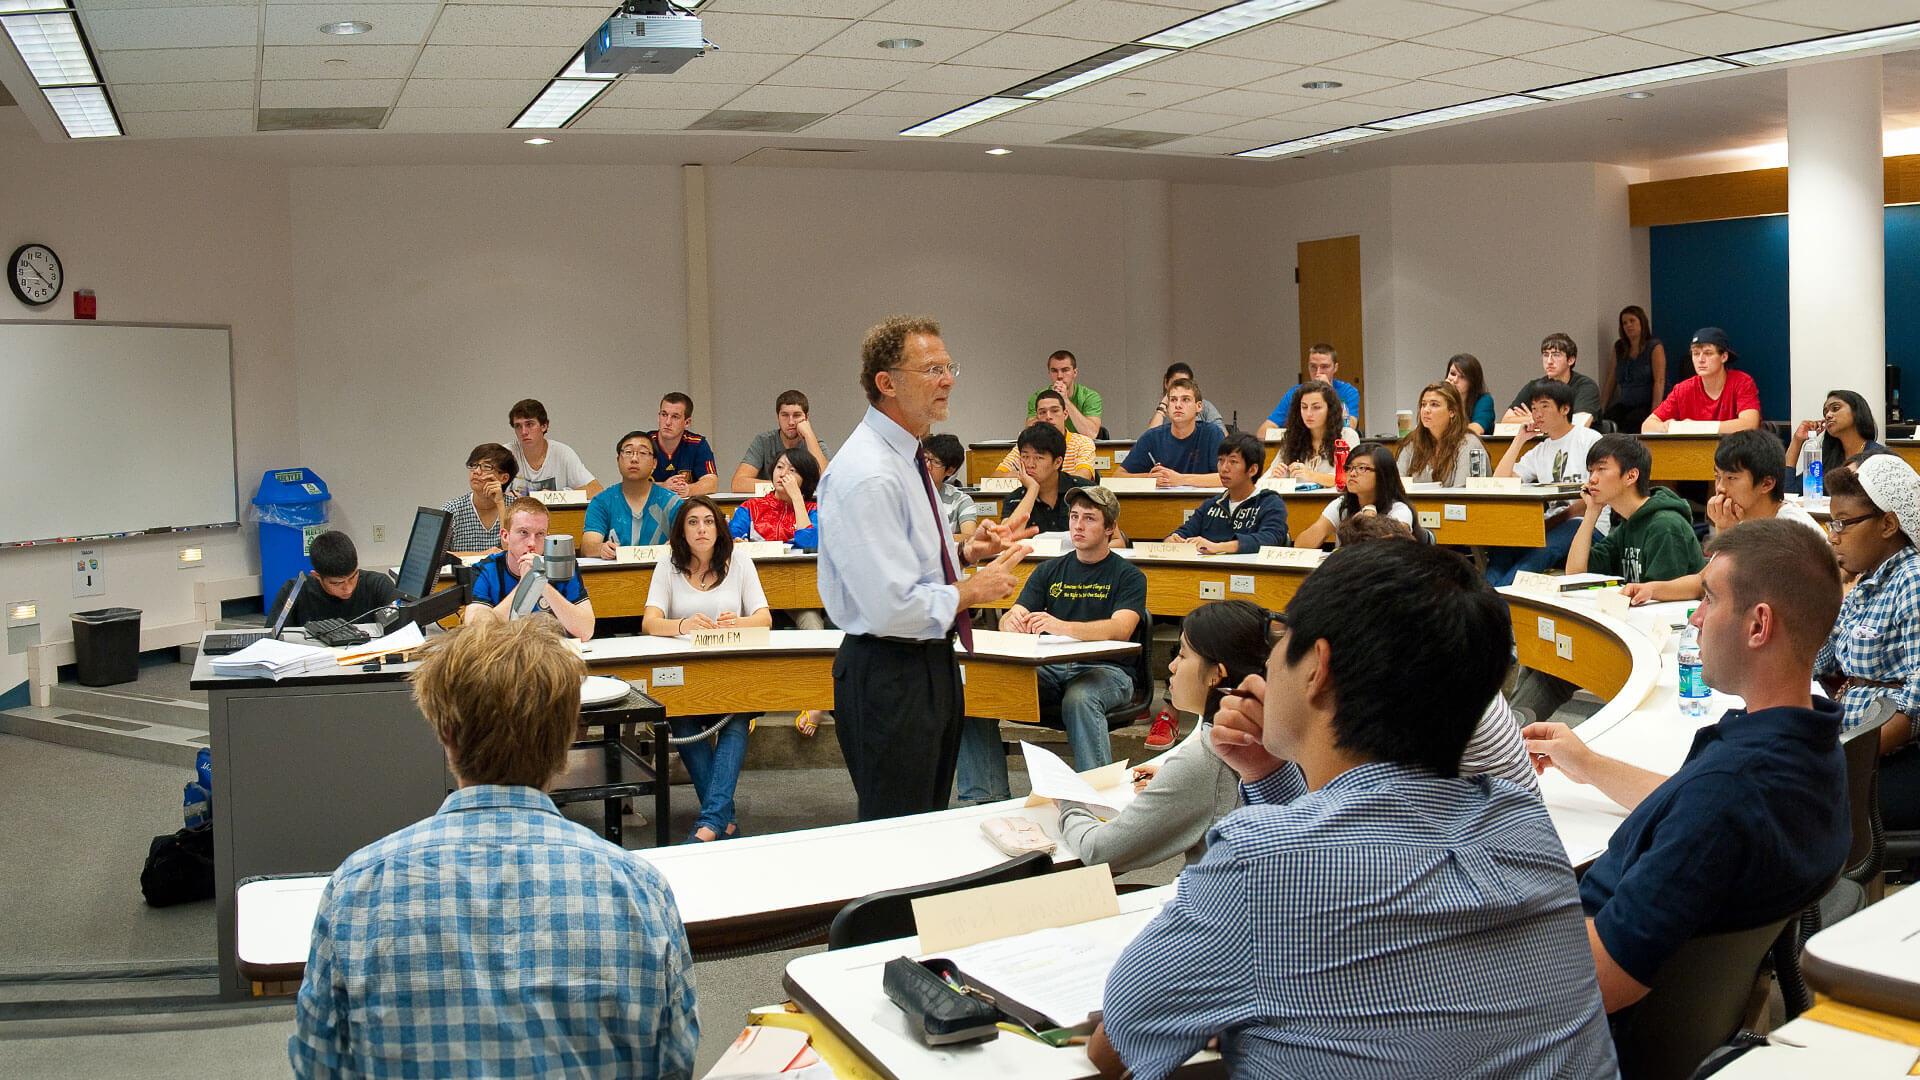 a professor stands in the middle of a lecture hall while students listen intently